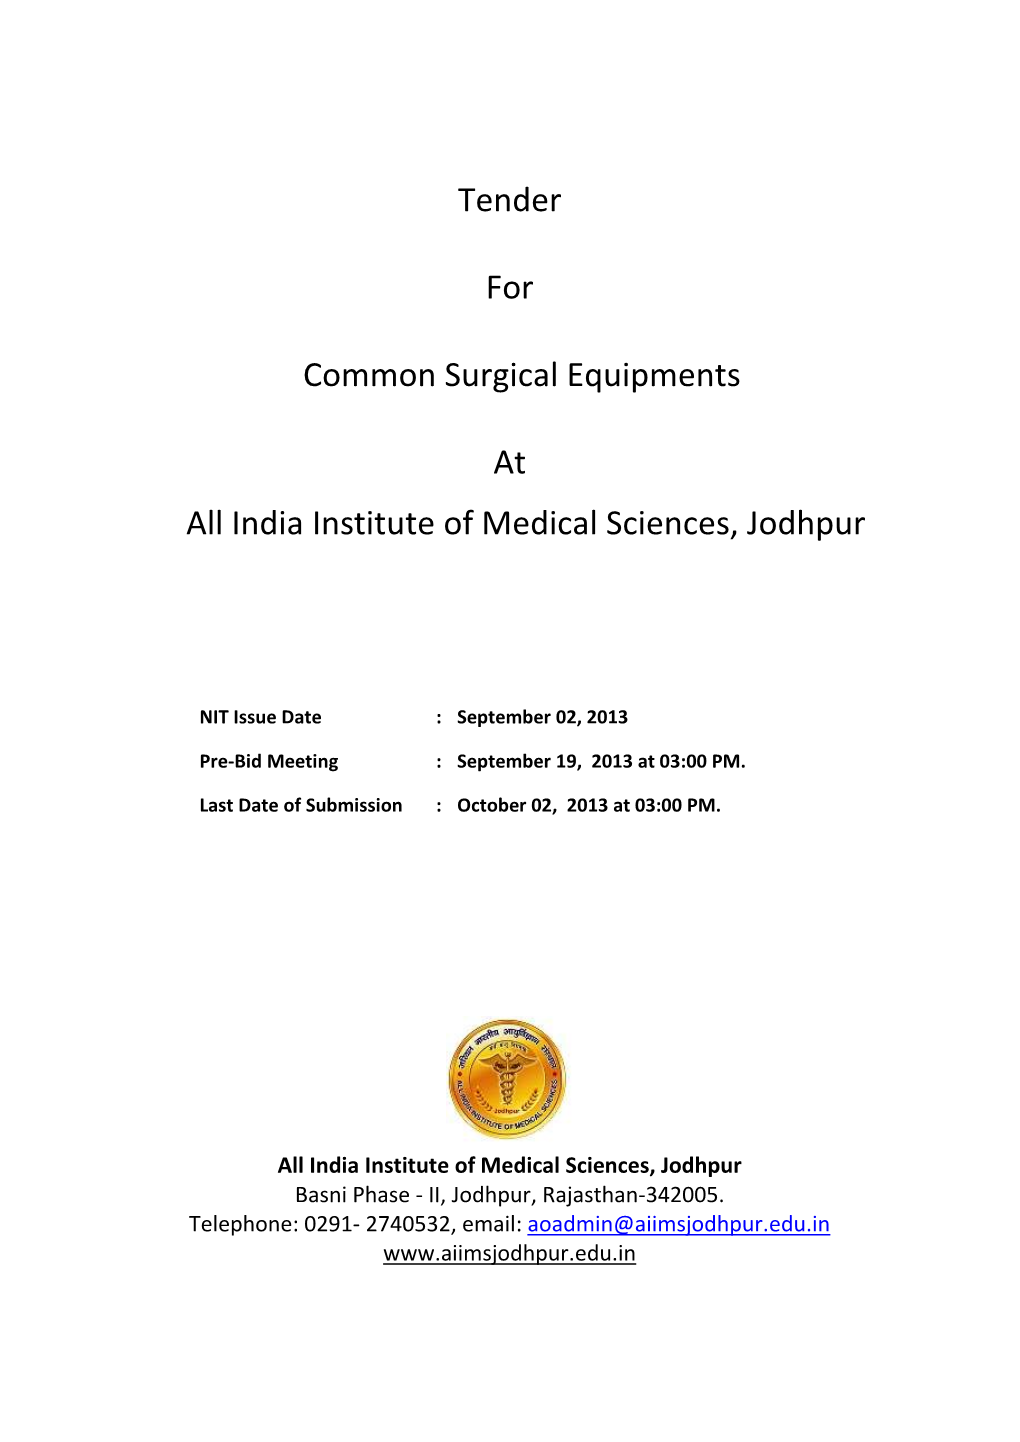 Tender for Common Surgical Equipments at All India Institute Of